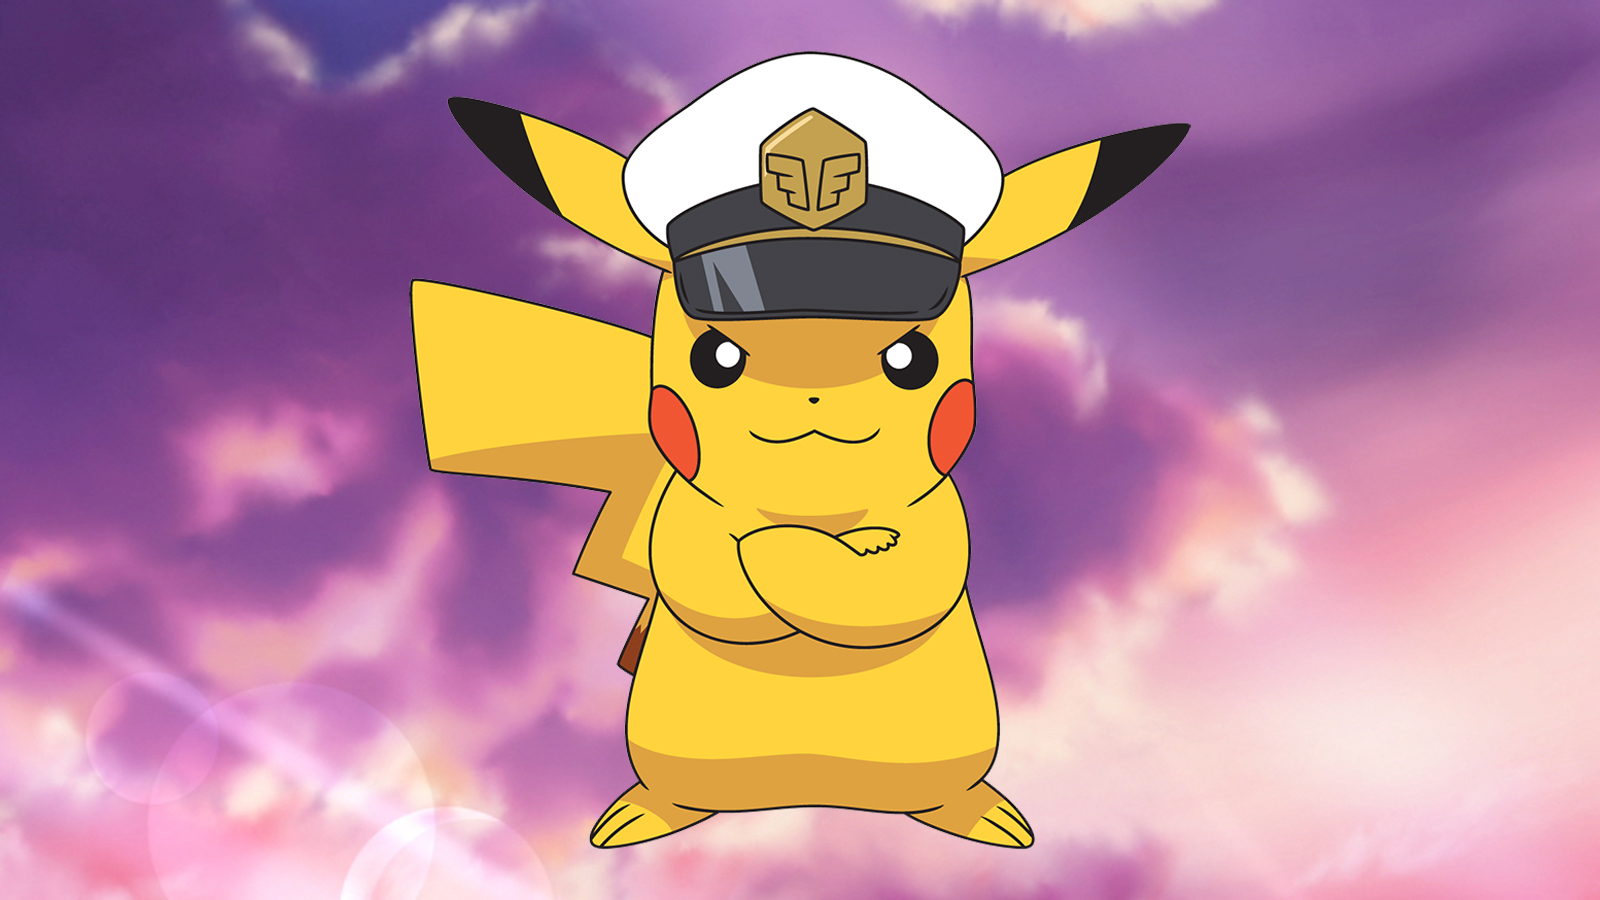 Pikachu to return with new partner in Pokemon anime replacing Ash ...